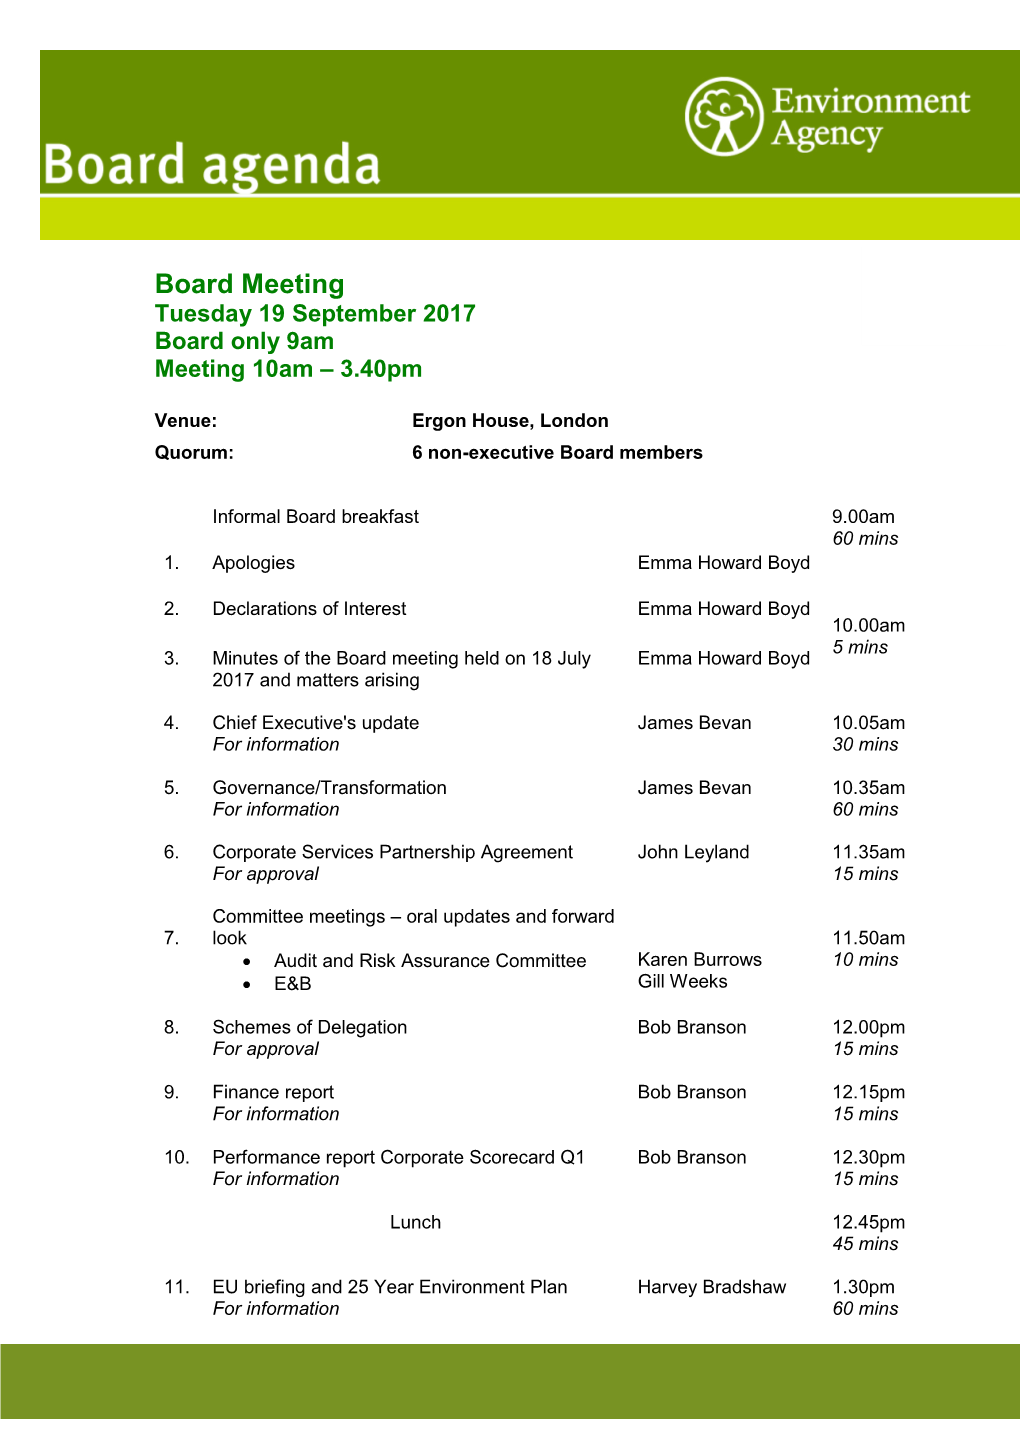 Board Meeting Tuesday 19 September 2017 Board Only 9Am Meeting 10Am – 3.40Pm